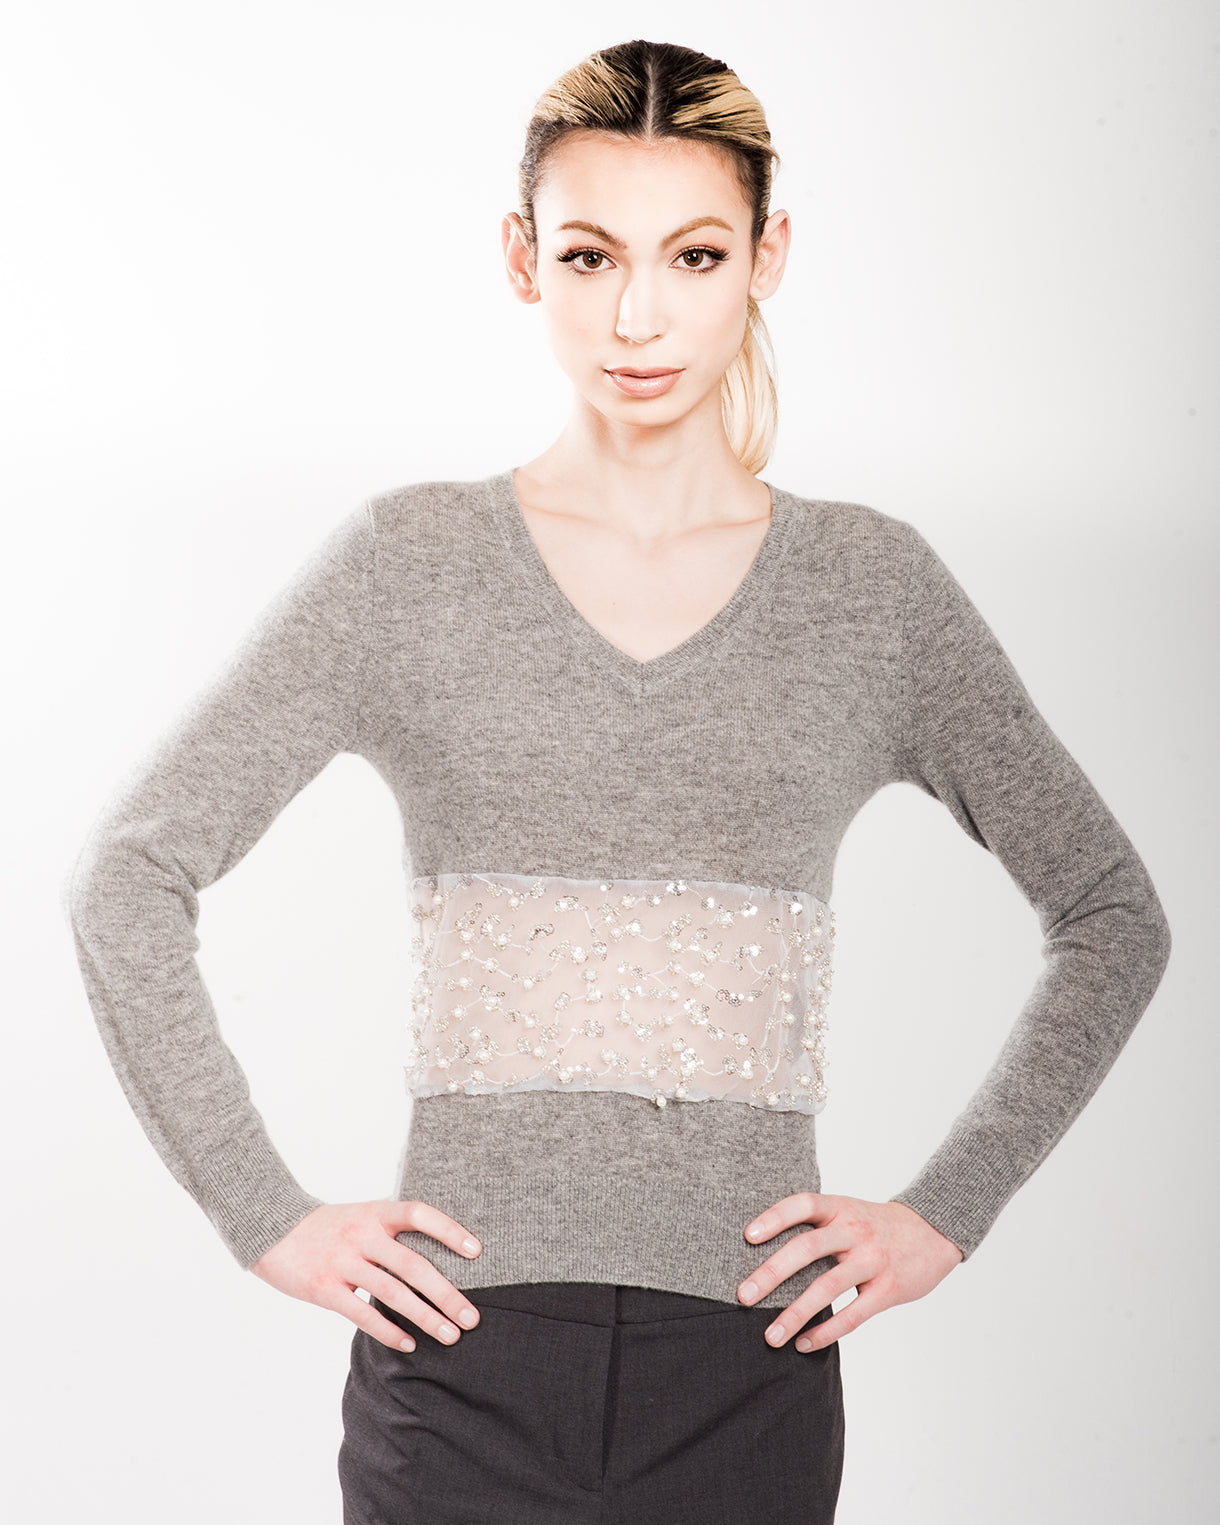 XS GREY LONG SLEEVE V-NECK CASHMERE SWEATER WITH FRONT WAIST PEEKABOO DETAIL OF PEARL, CRYSTAL AND MINI SEQUIN BEADING EMBROIDERED ON WHITE TULLE WITH WHITE SILK ORGANZA LINING